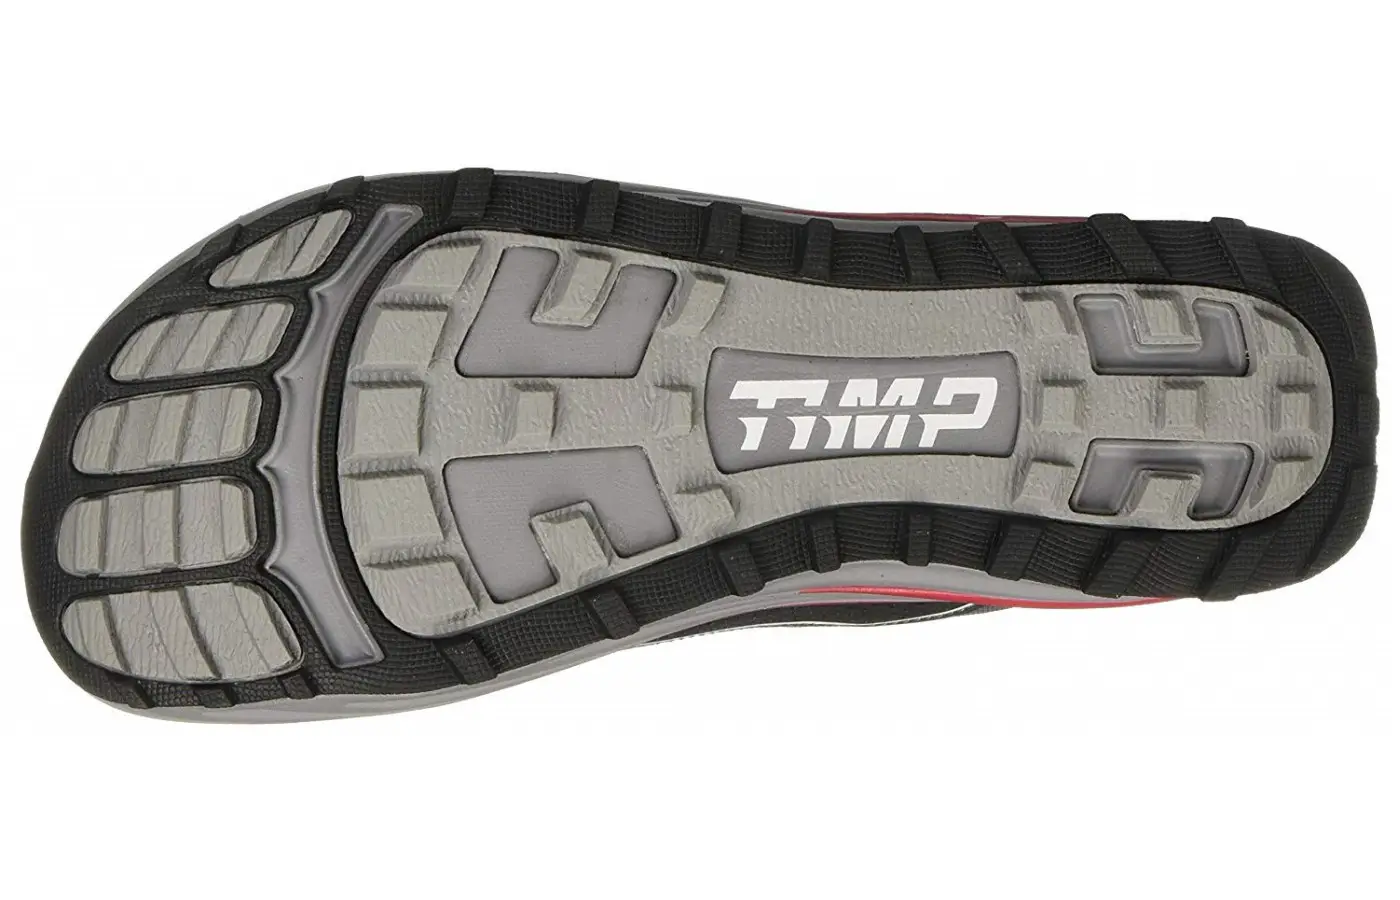 Patented Trail Claw technology makes the Timp a great choice for athletes.